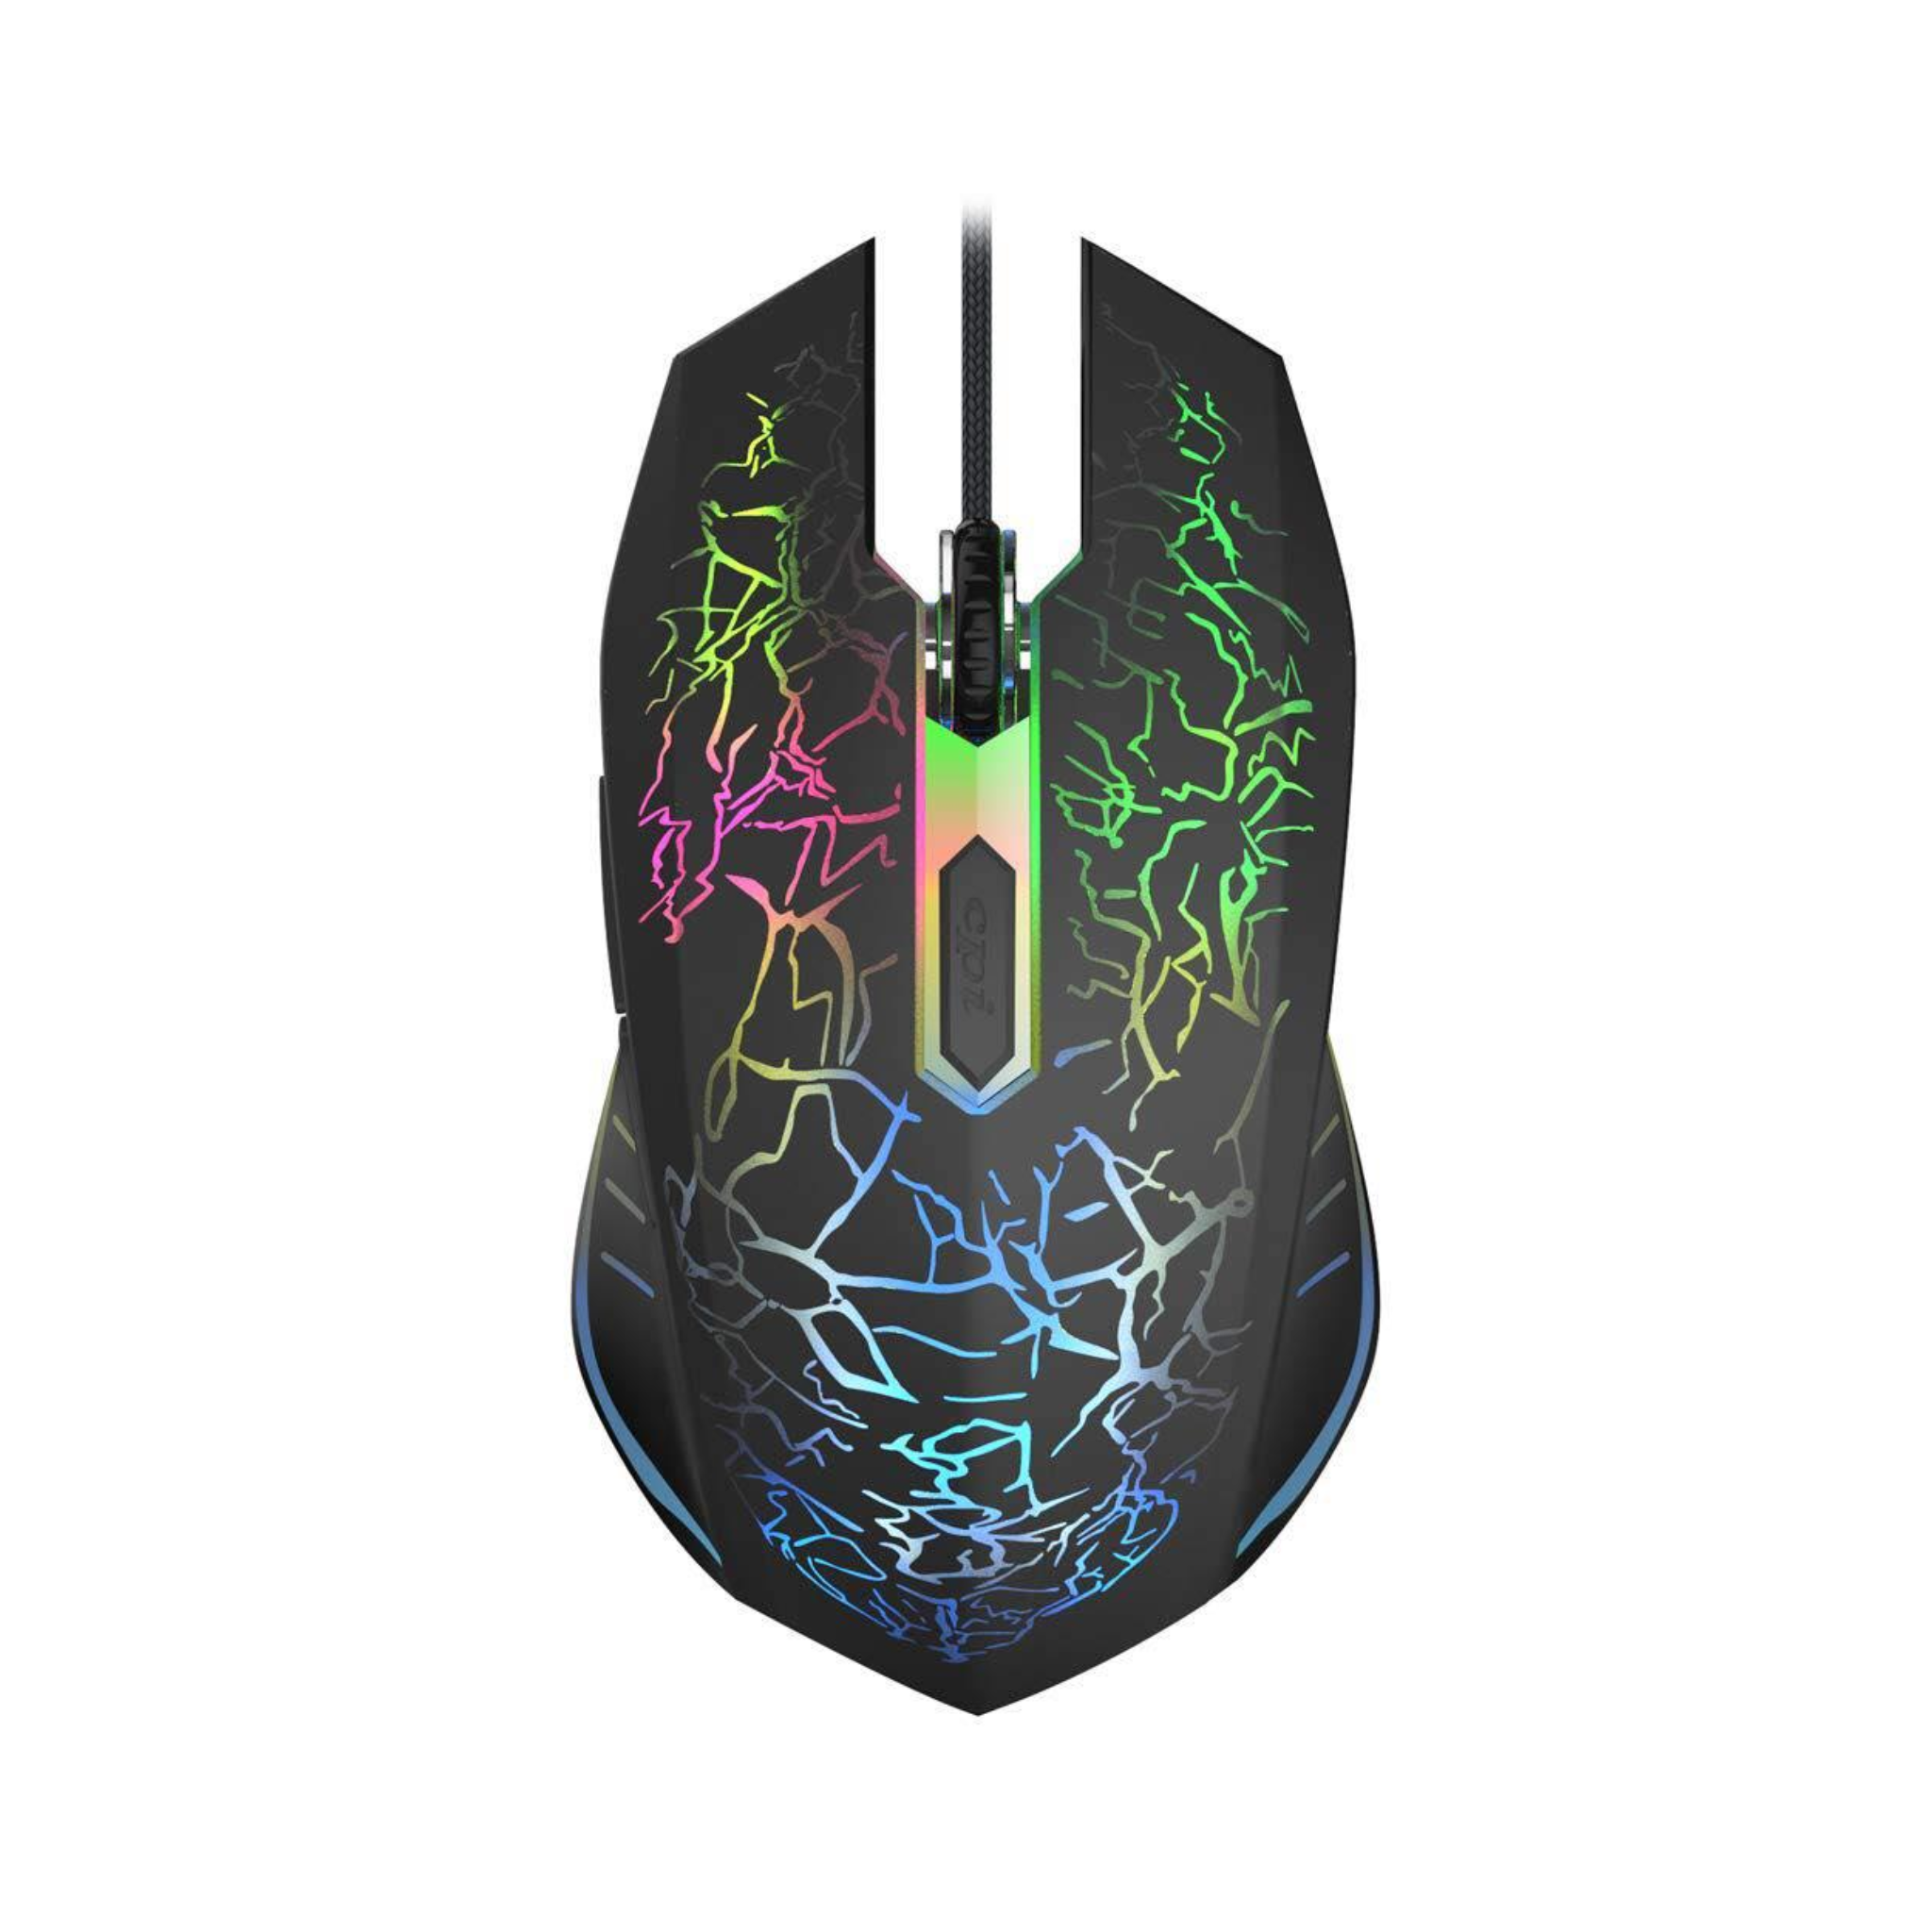 Mouse, USB Wired & Super Feel Roller, for Gaming